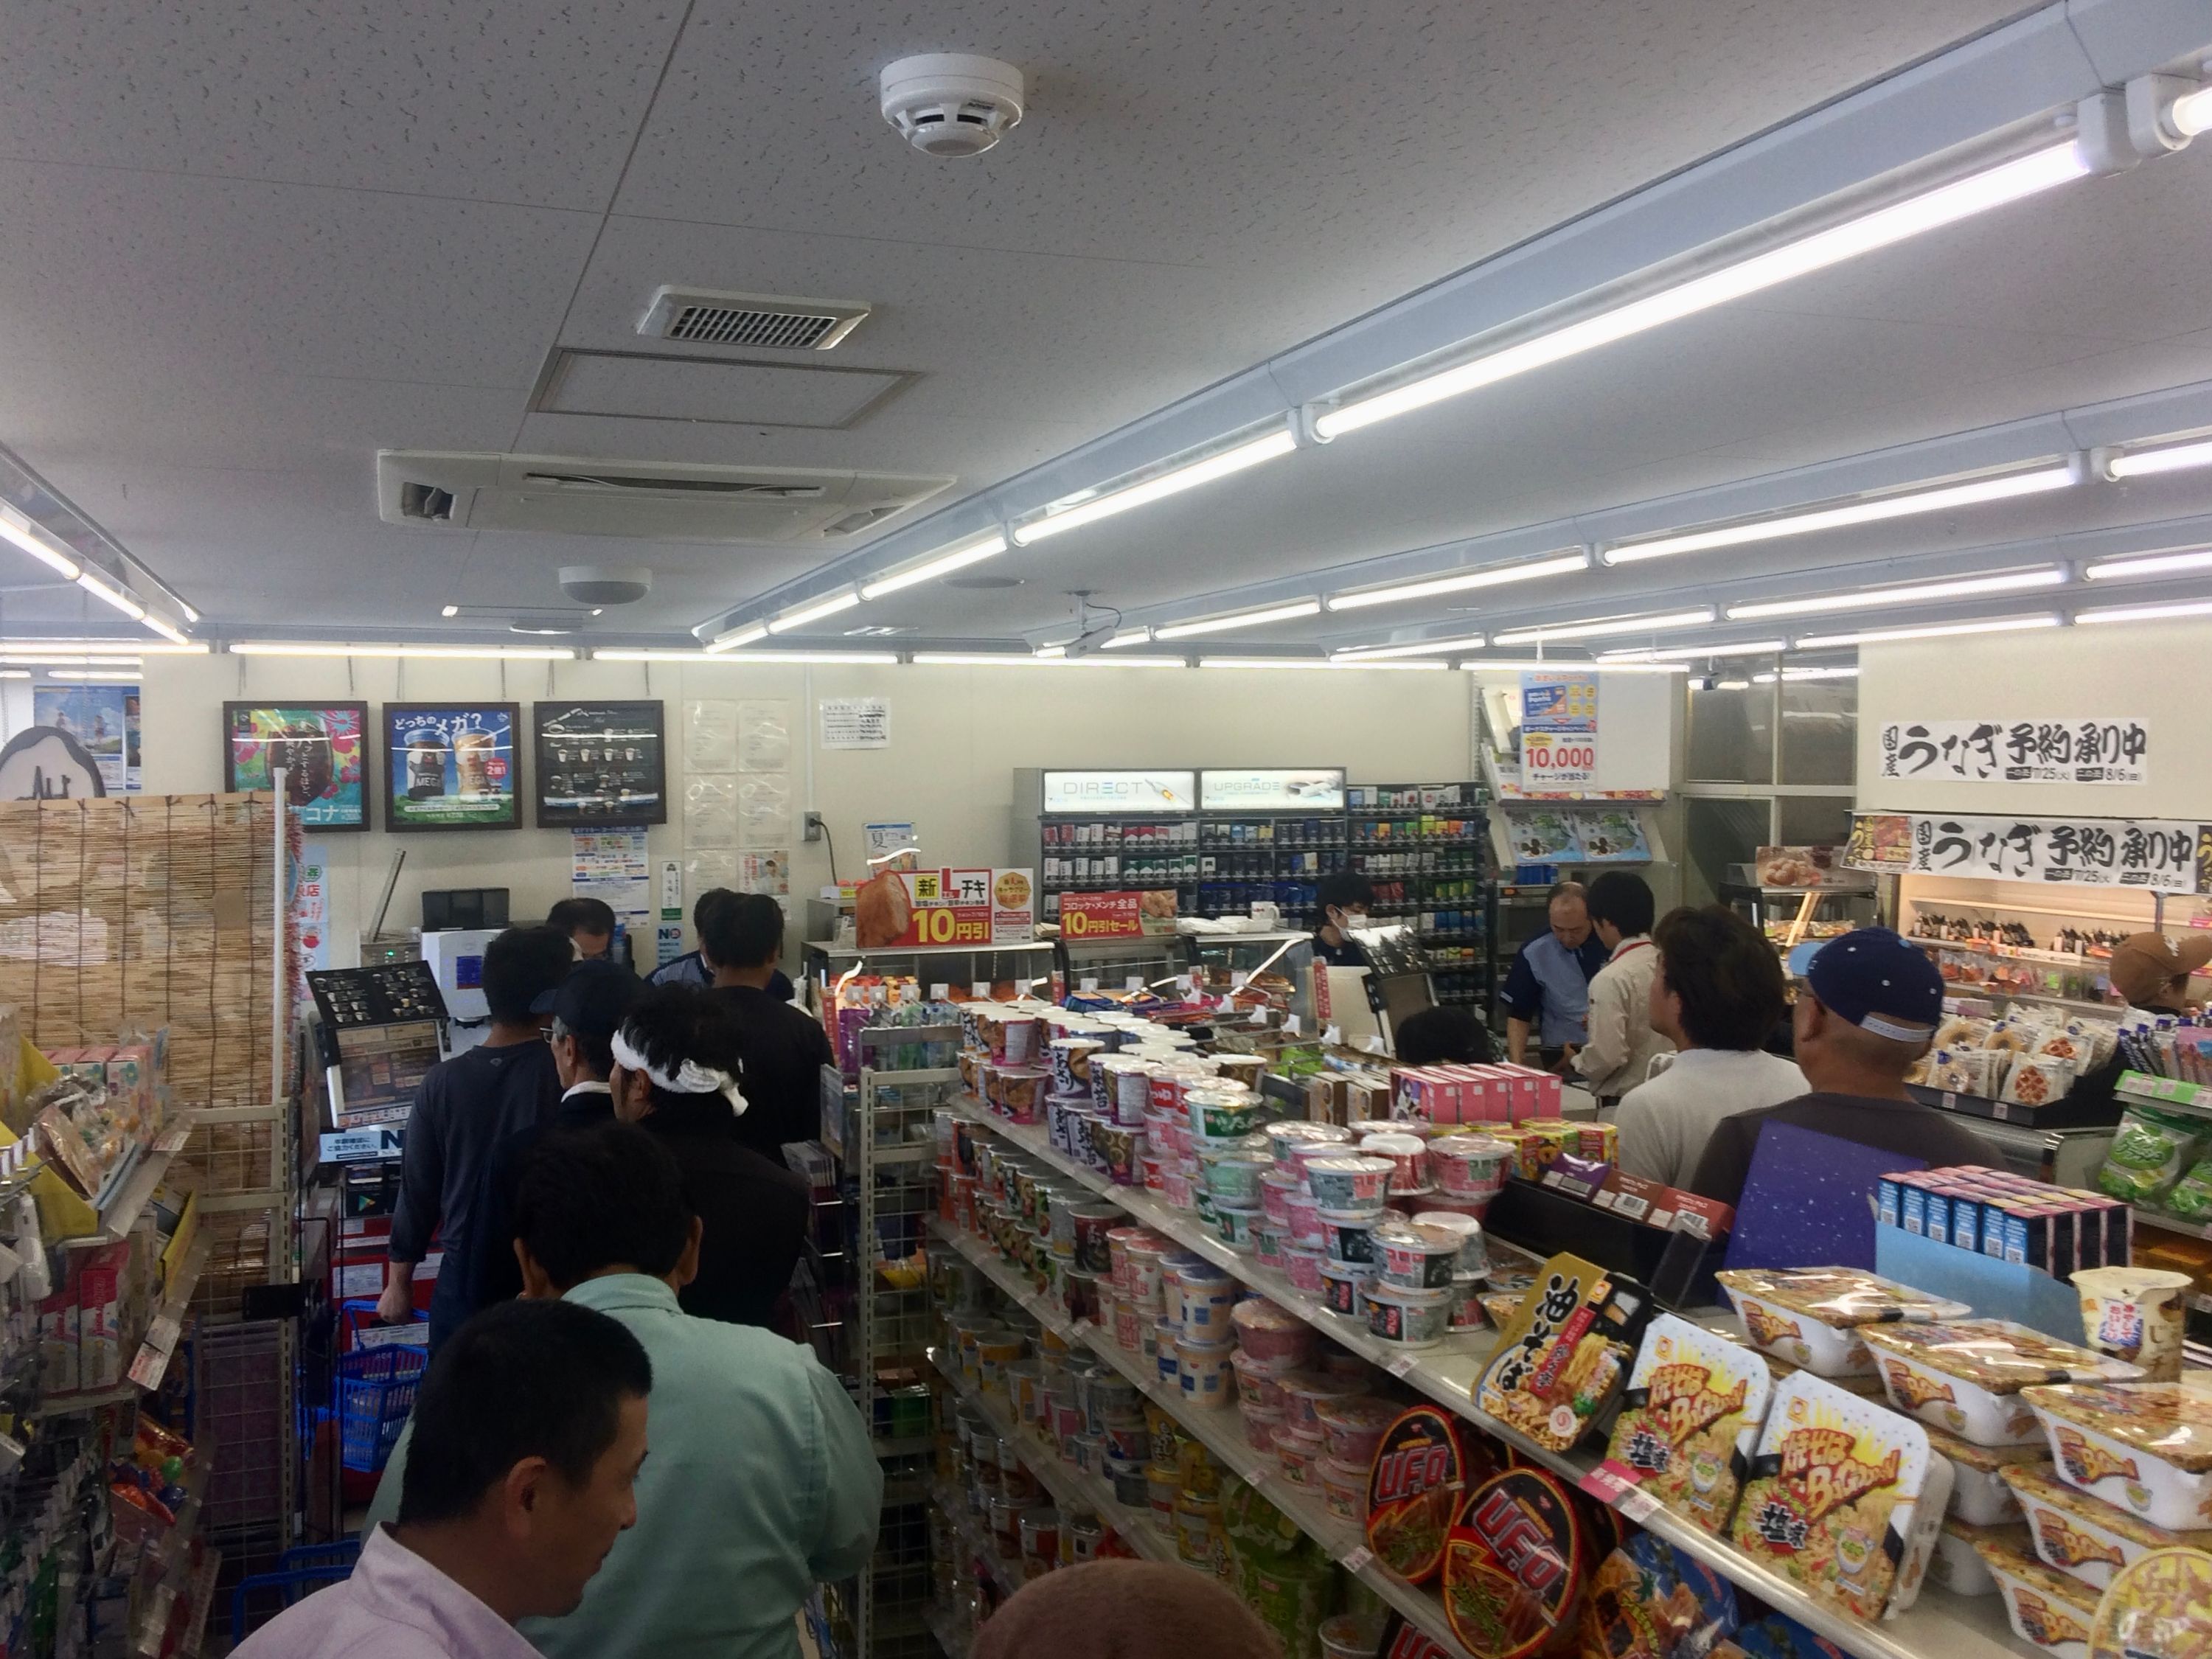 A long line of people wait in a convenience store.